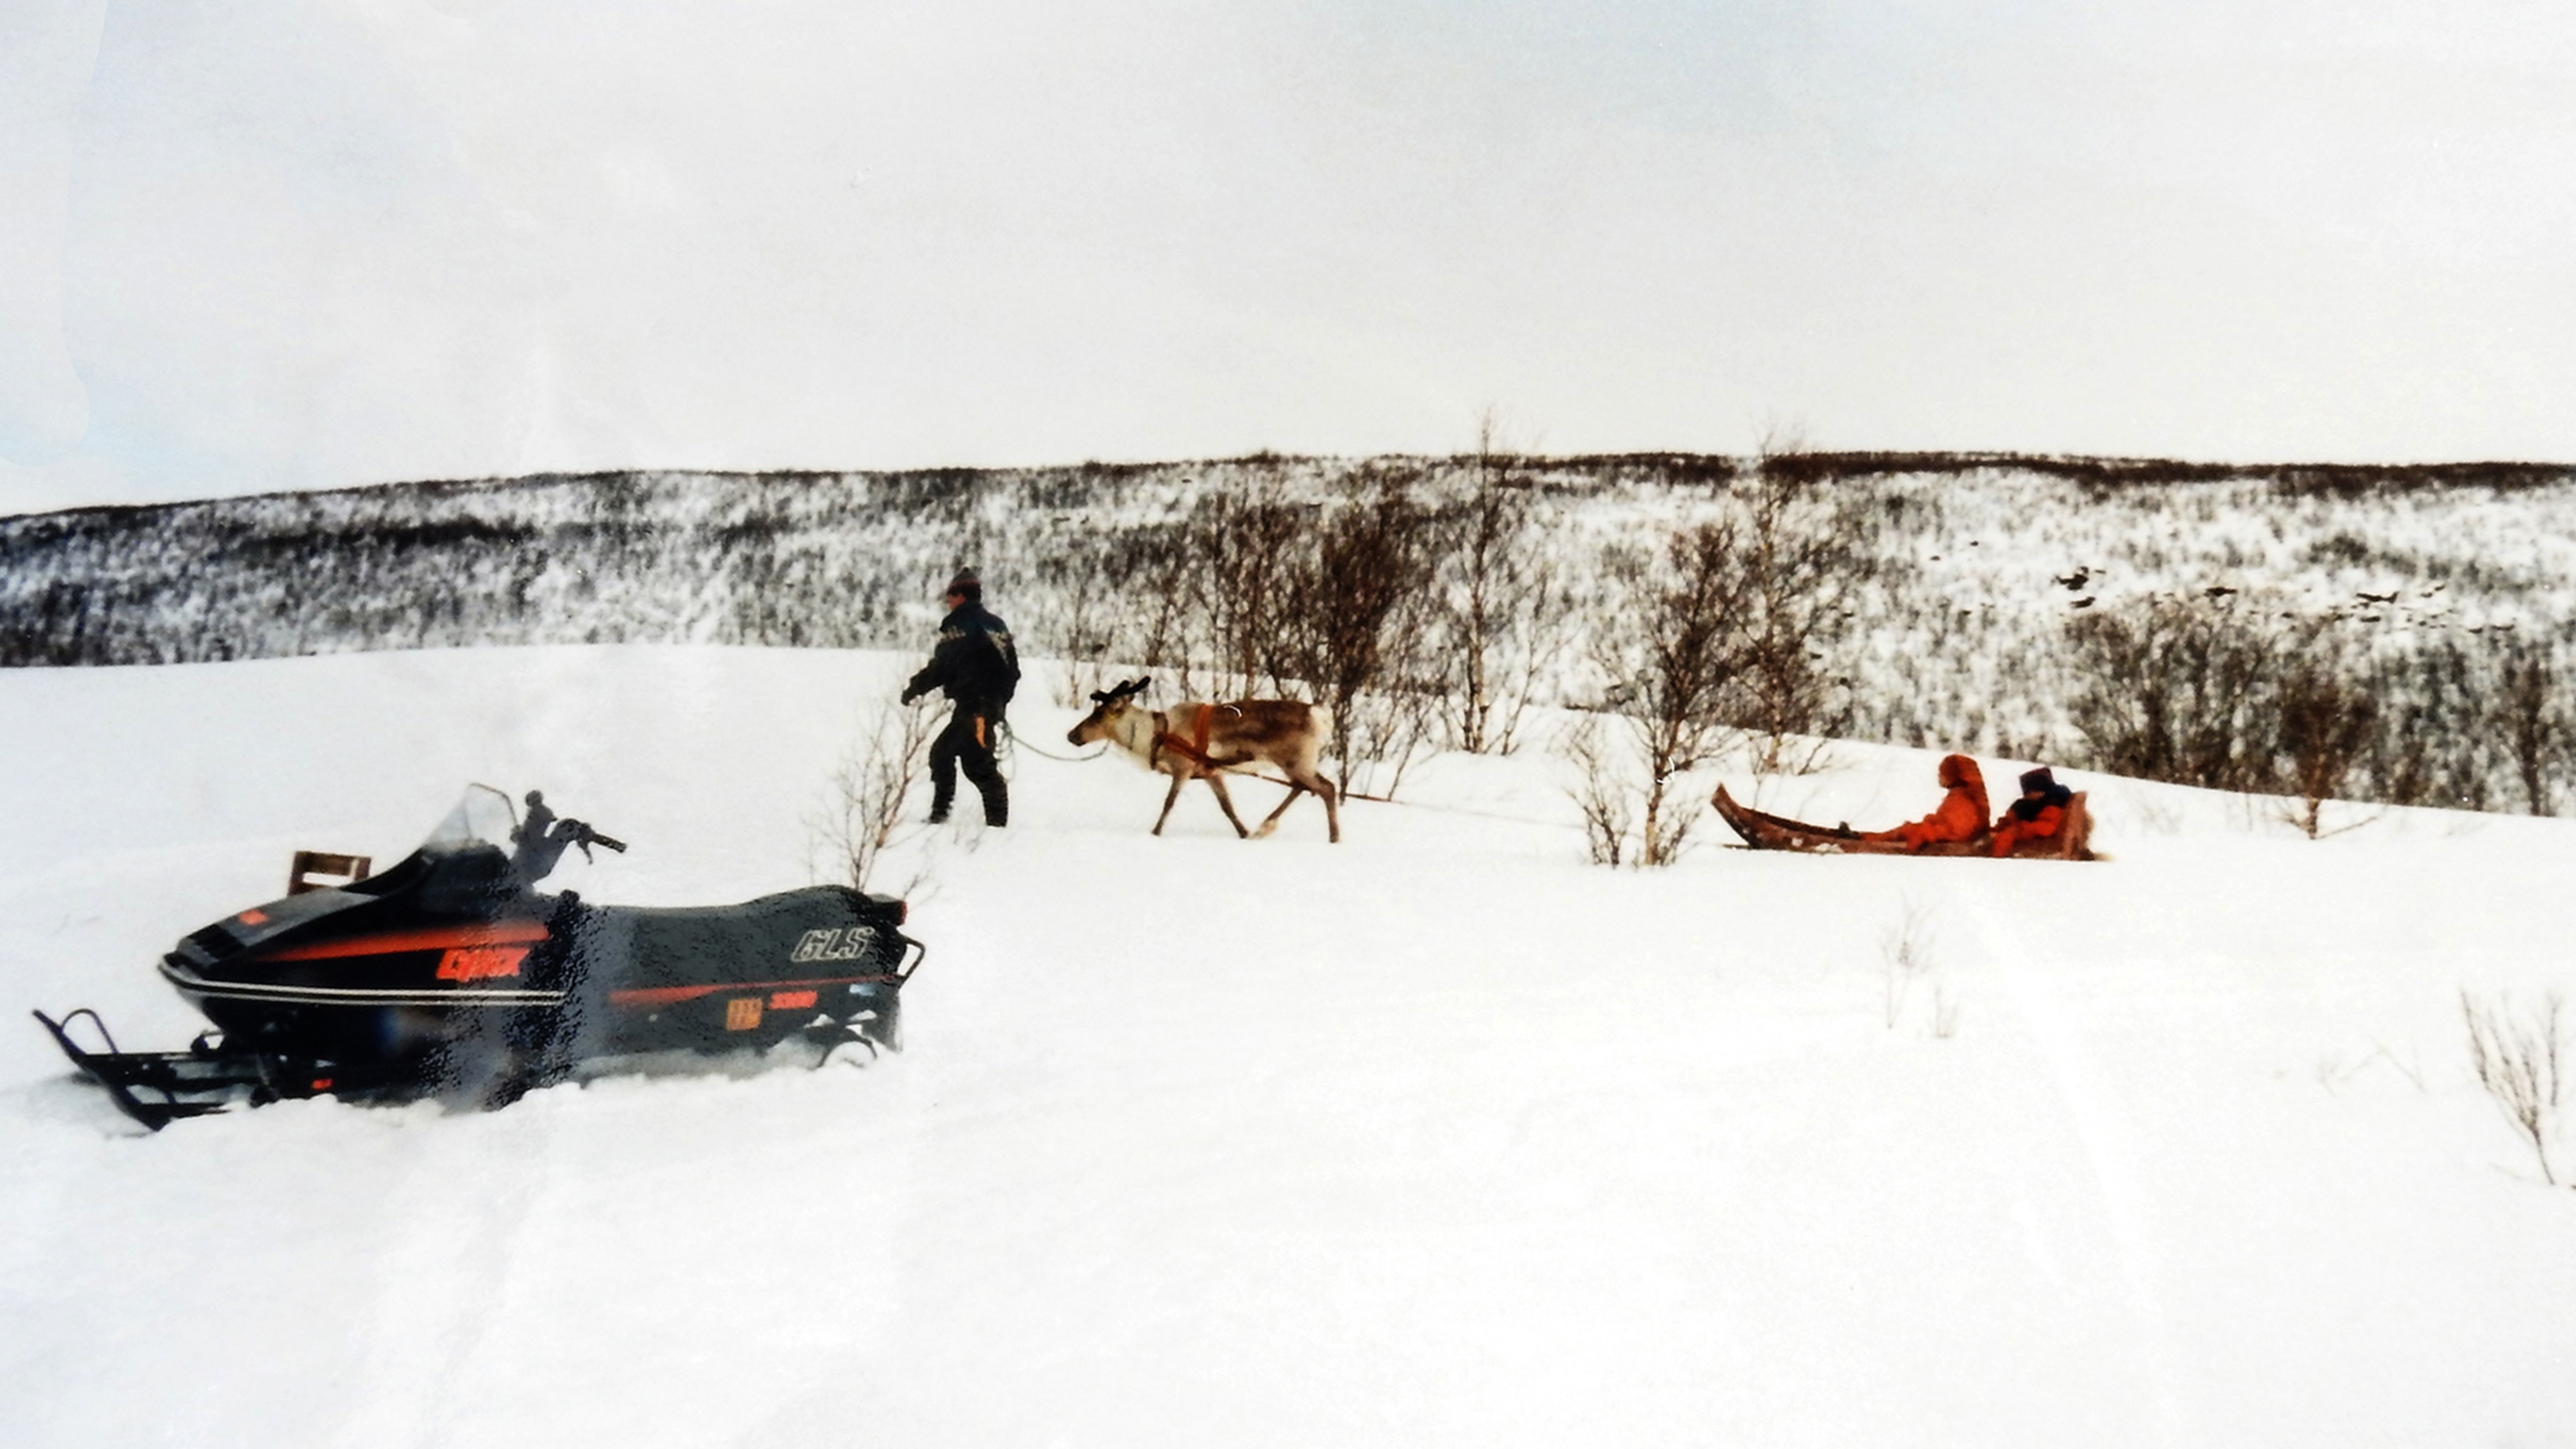 Reindeer towing two people sitting in a sleigh